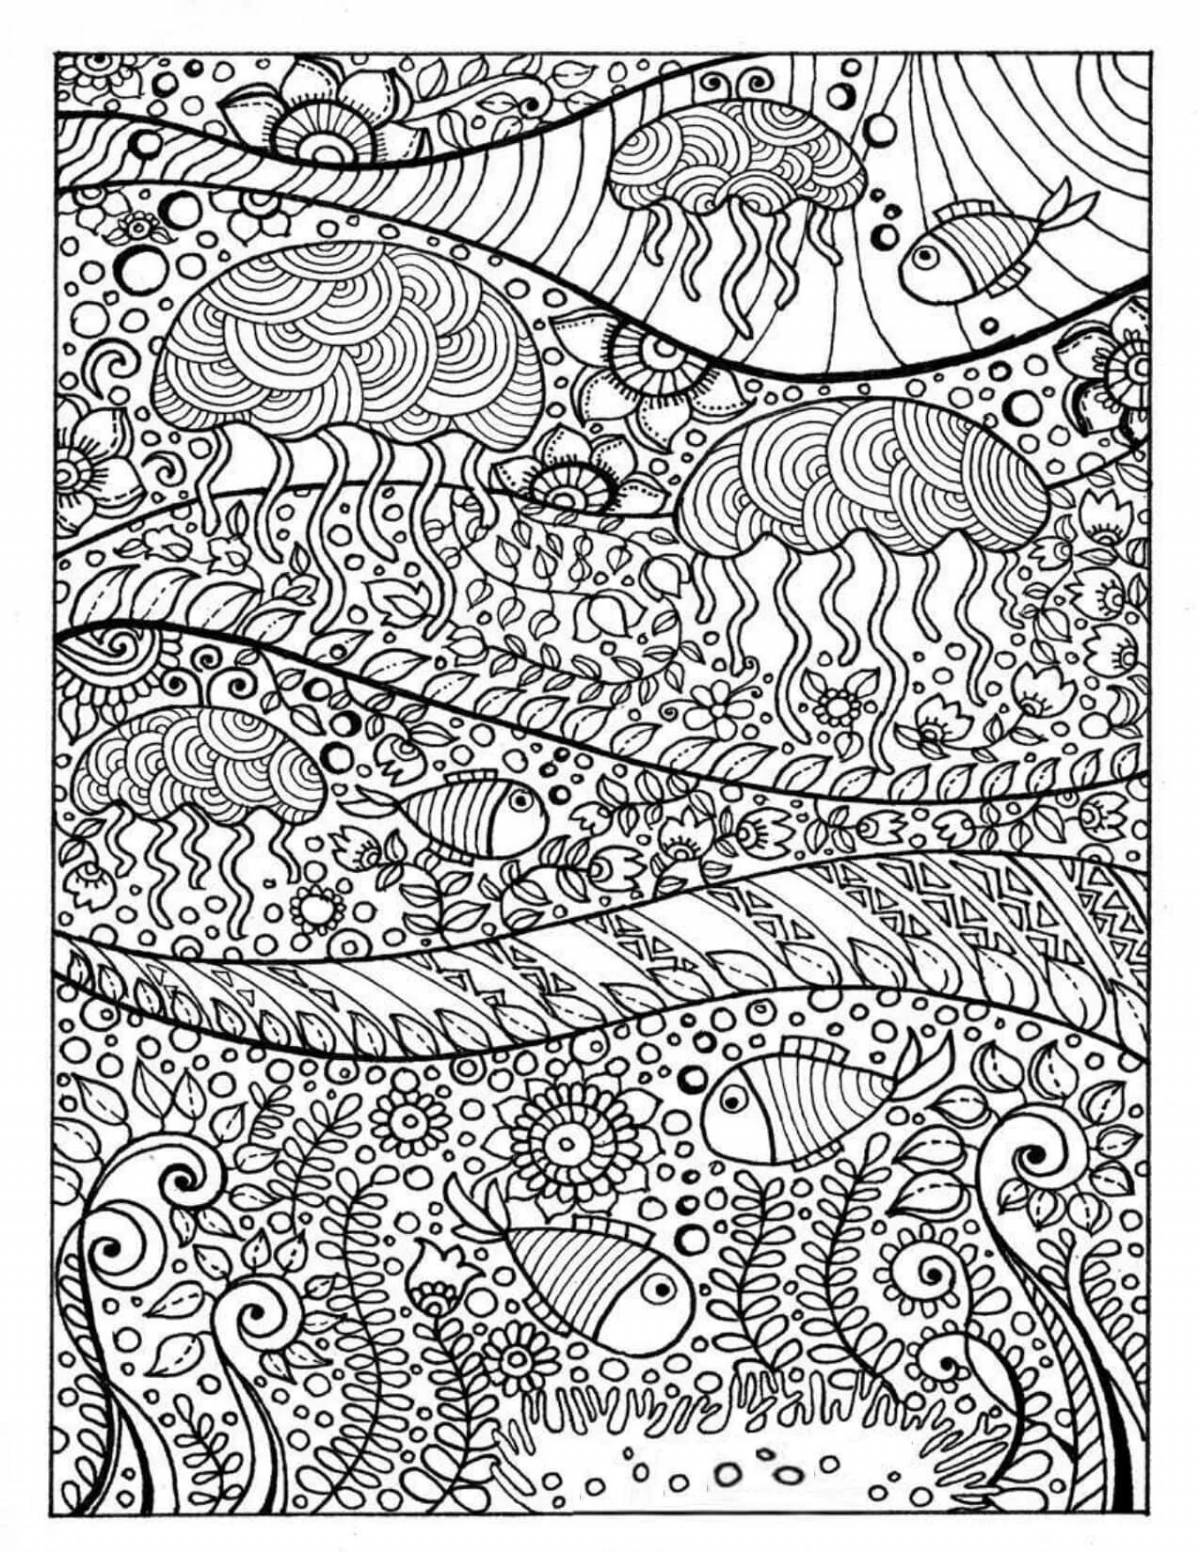 Encouraging coloring book for children